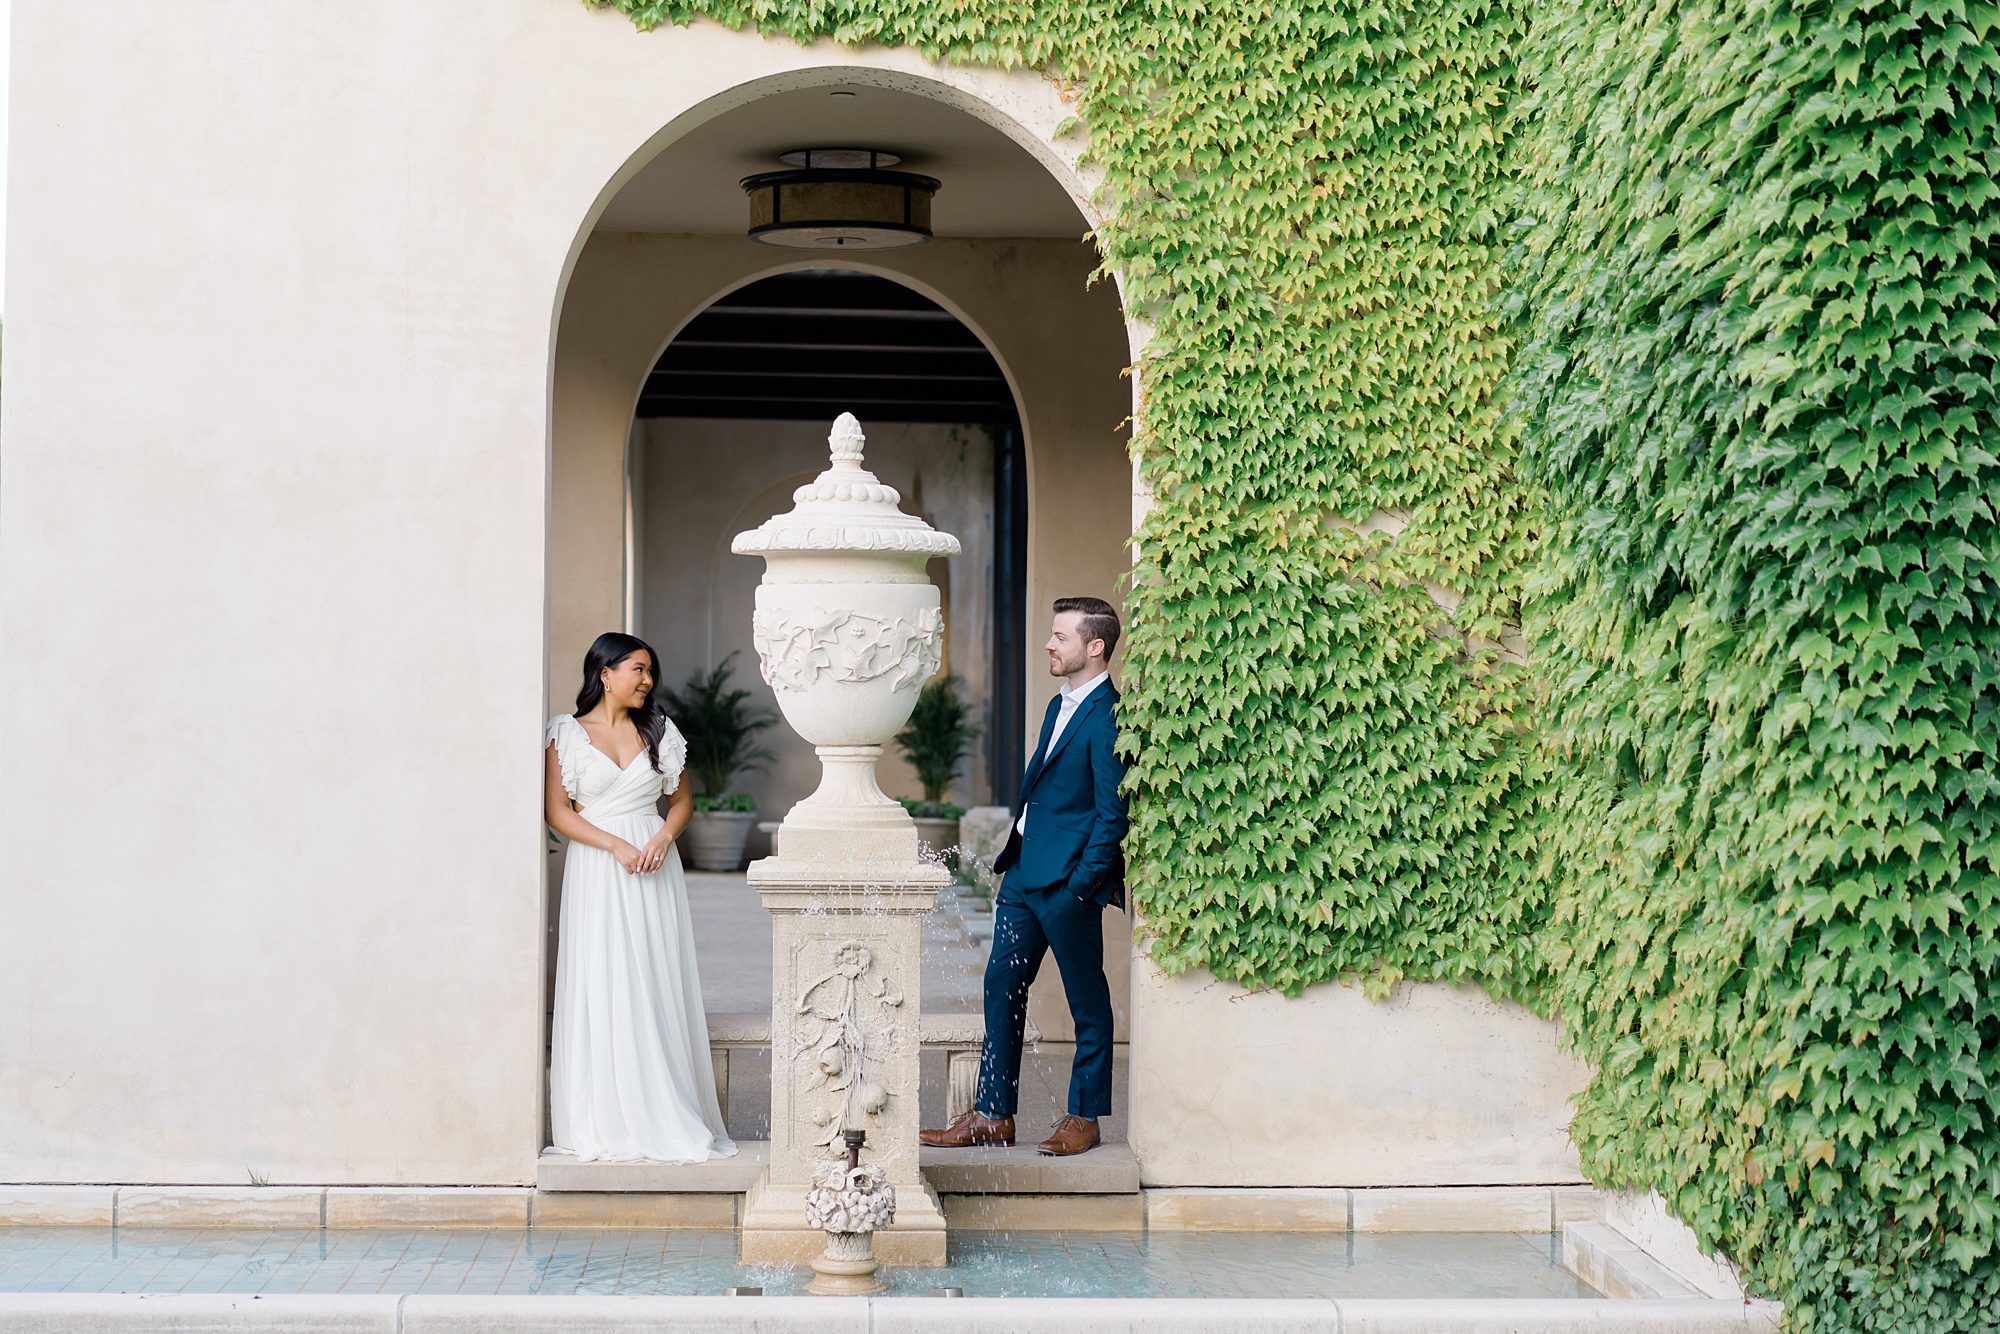 classic engagement portraits at Longwood Gardens in PA